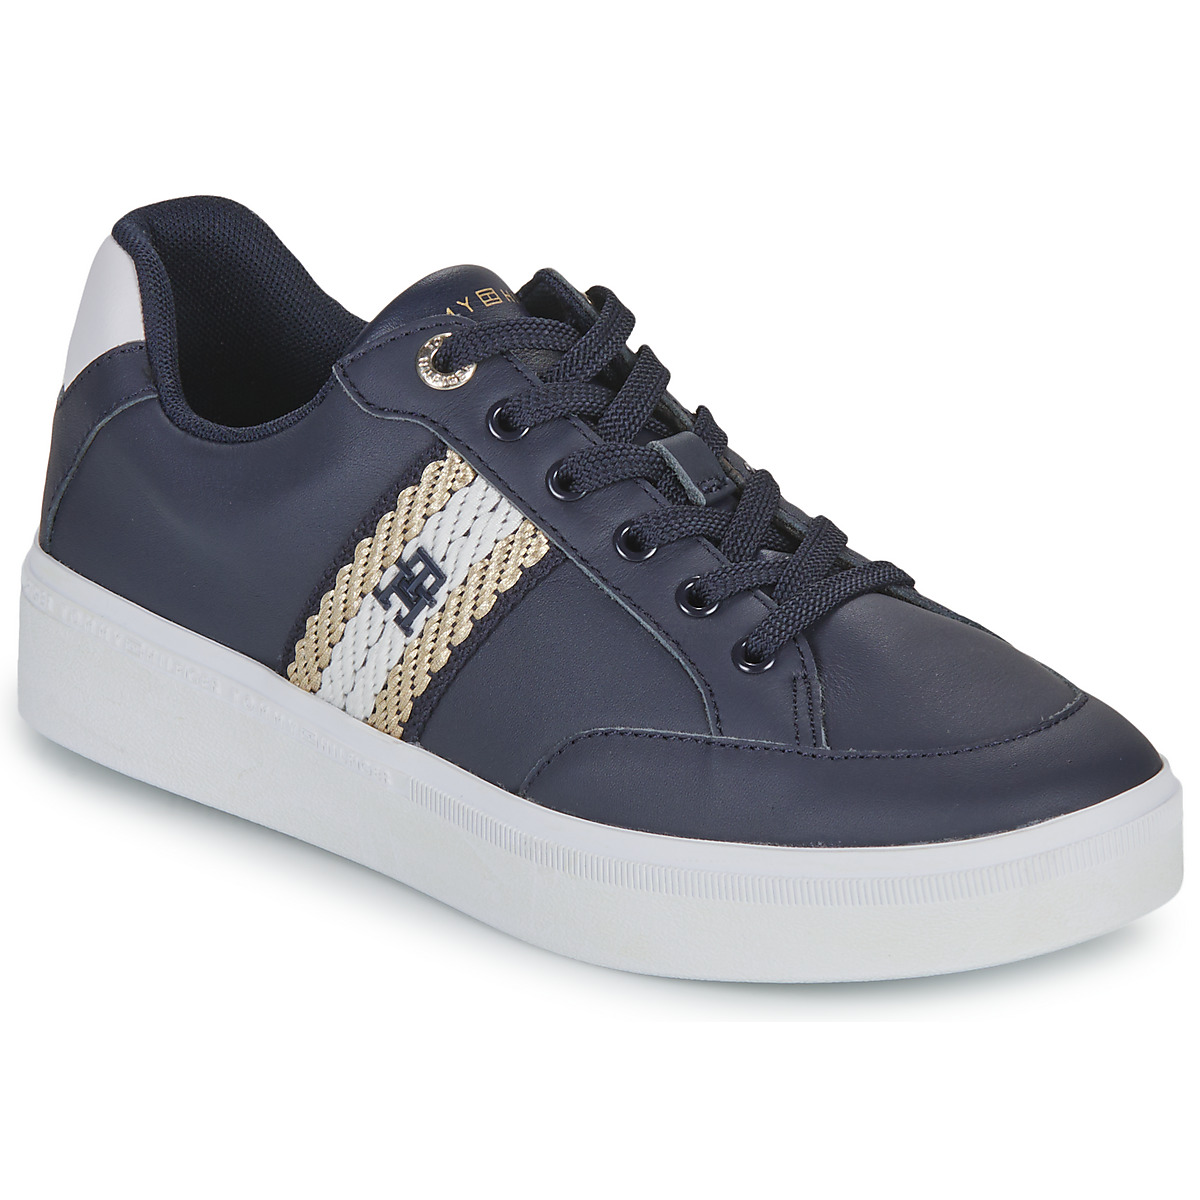 Chaussures Femme Чиносы tommy hilfiger штани COURT SNEAKER WITH WEBBING Marine